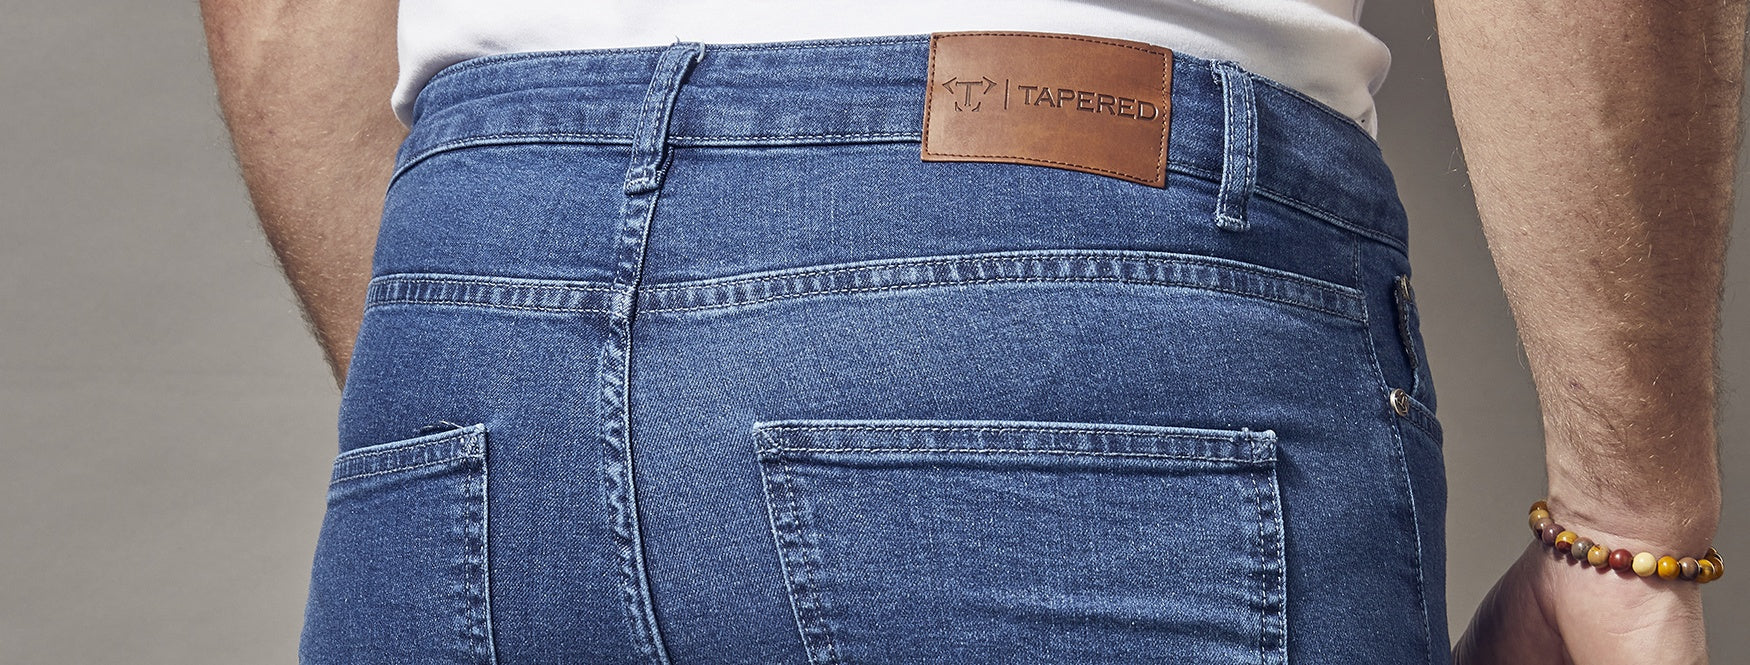 How to Alter Jeans at the Waist for a Perfect Fit